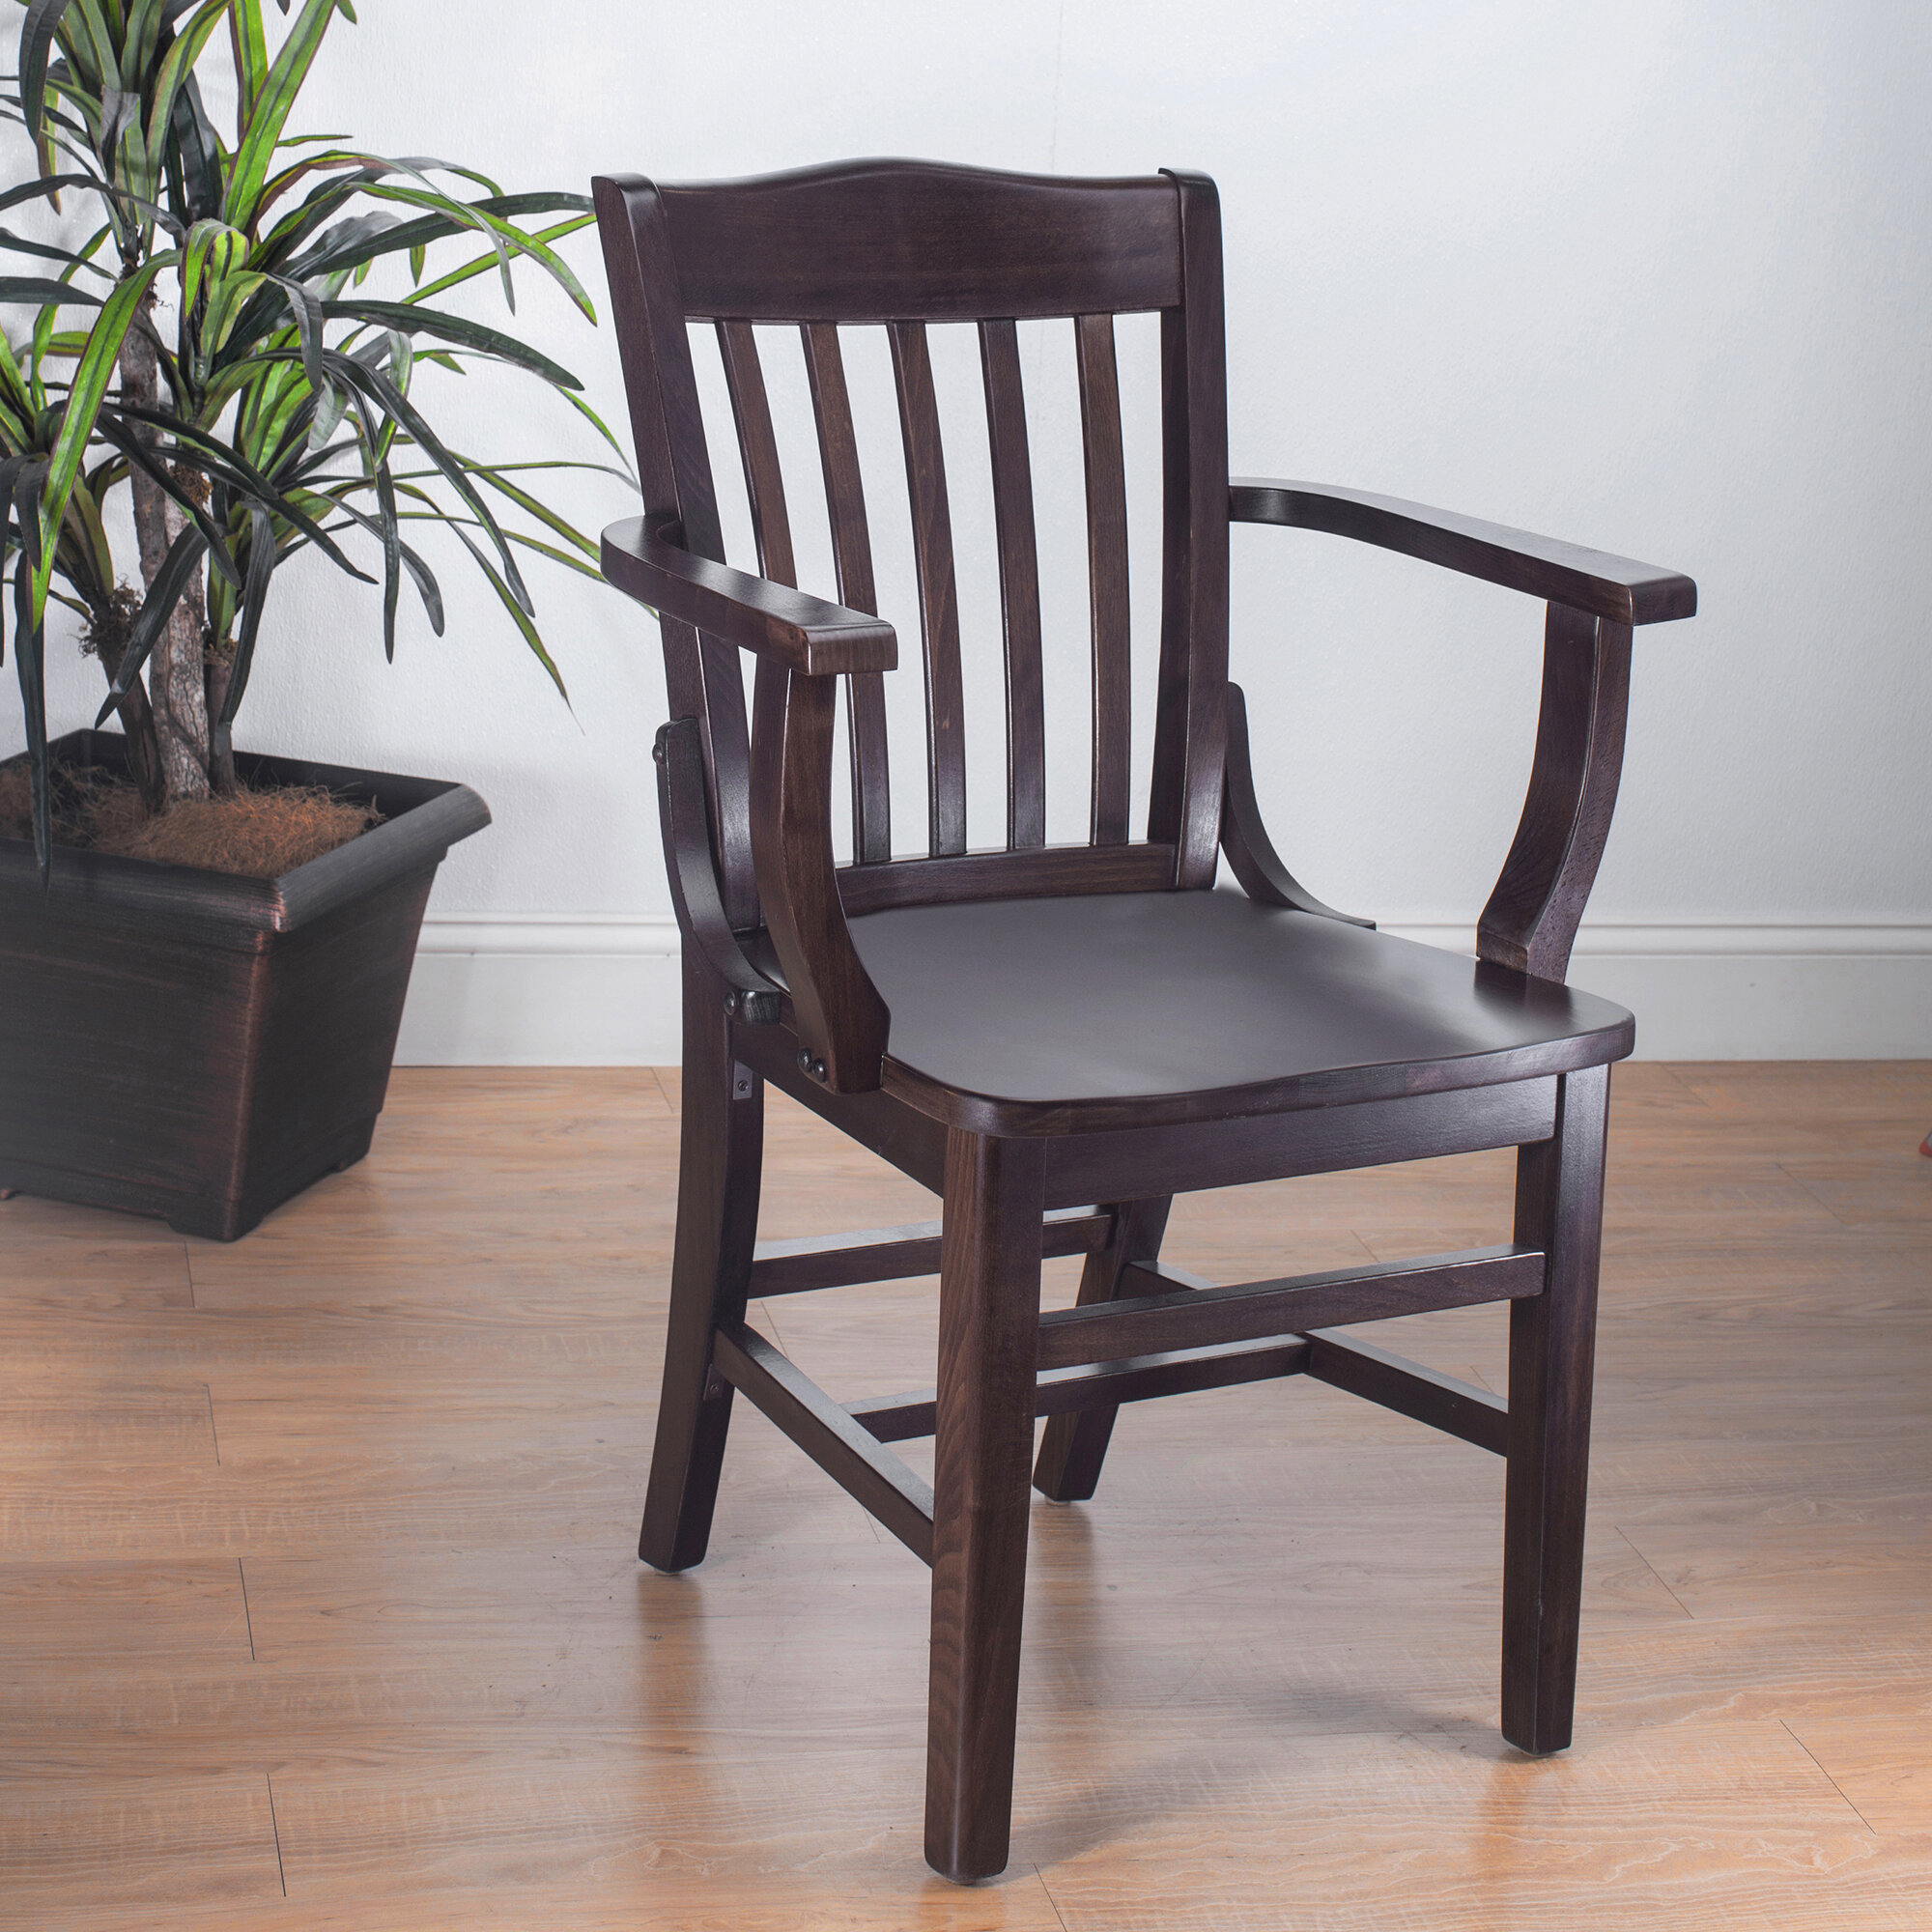 Alcott Hill Kershaw Solid Wood Dining Chair Reviews Wayfair